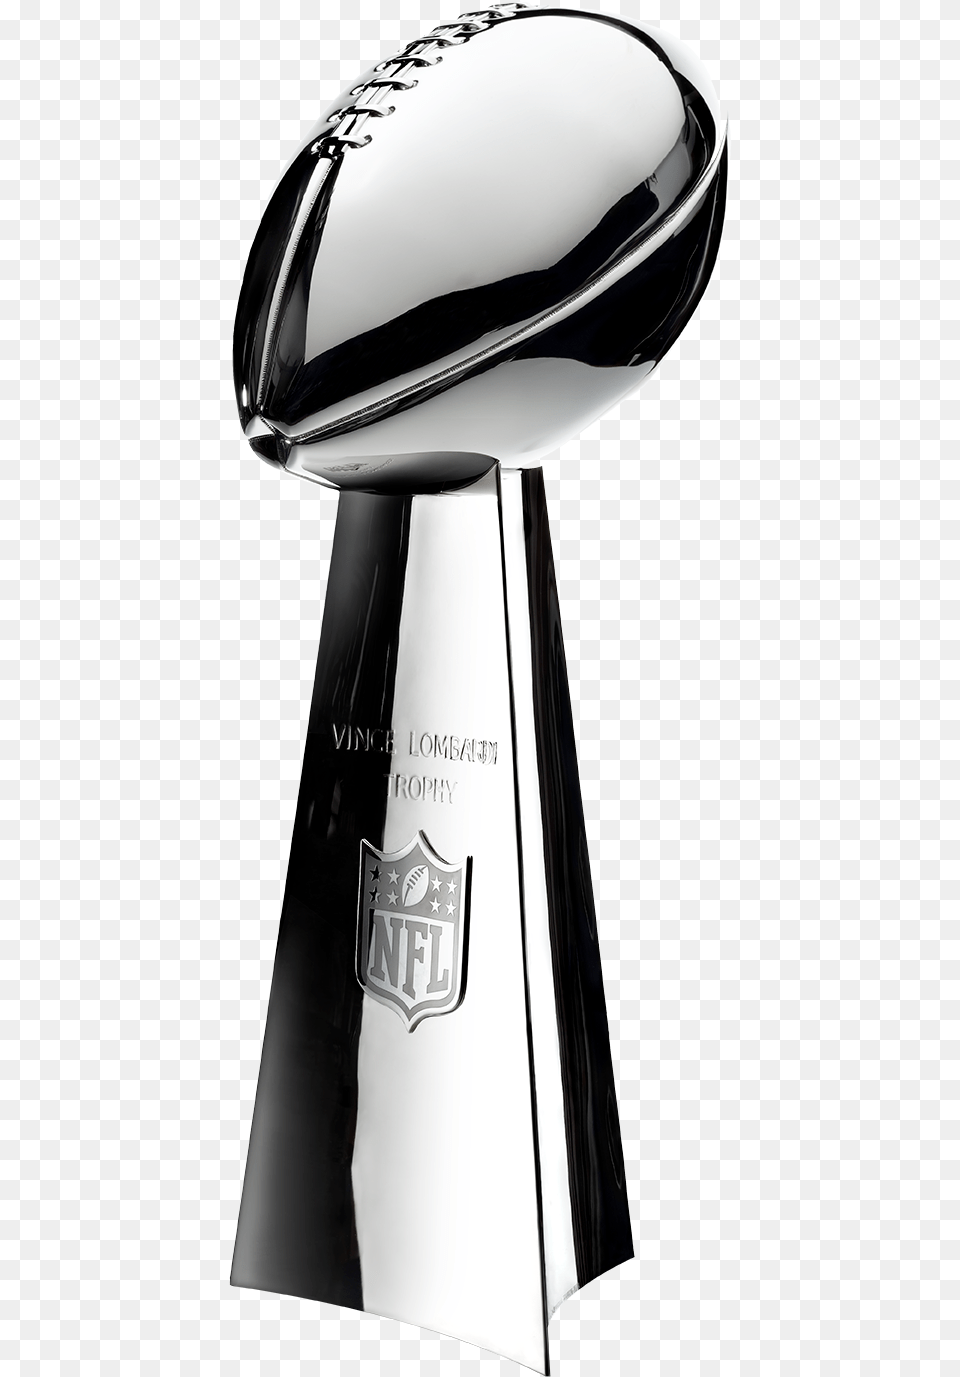 Vince Lombardi Trophy Free Png Download